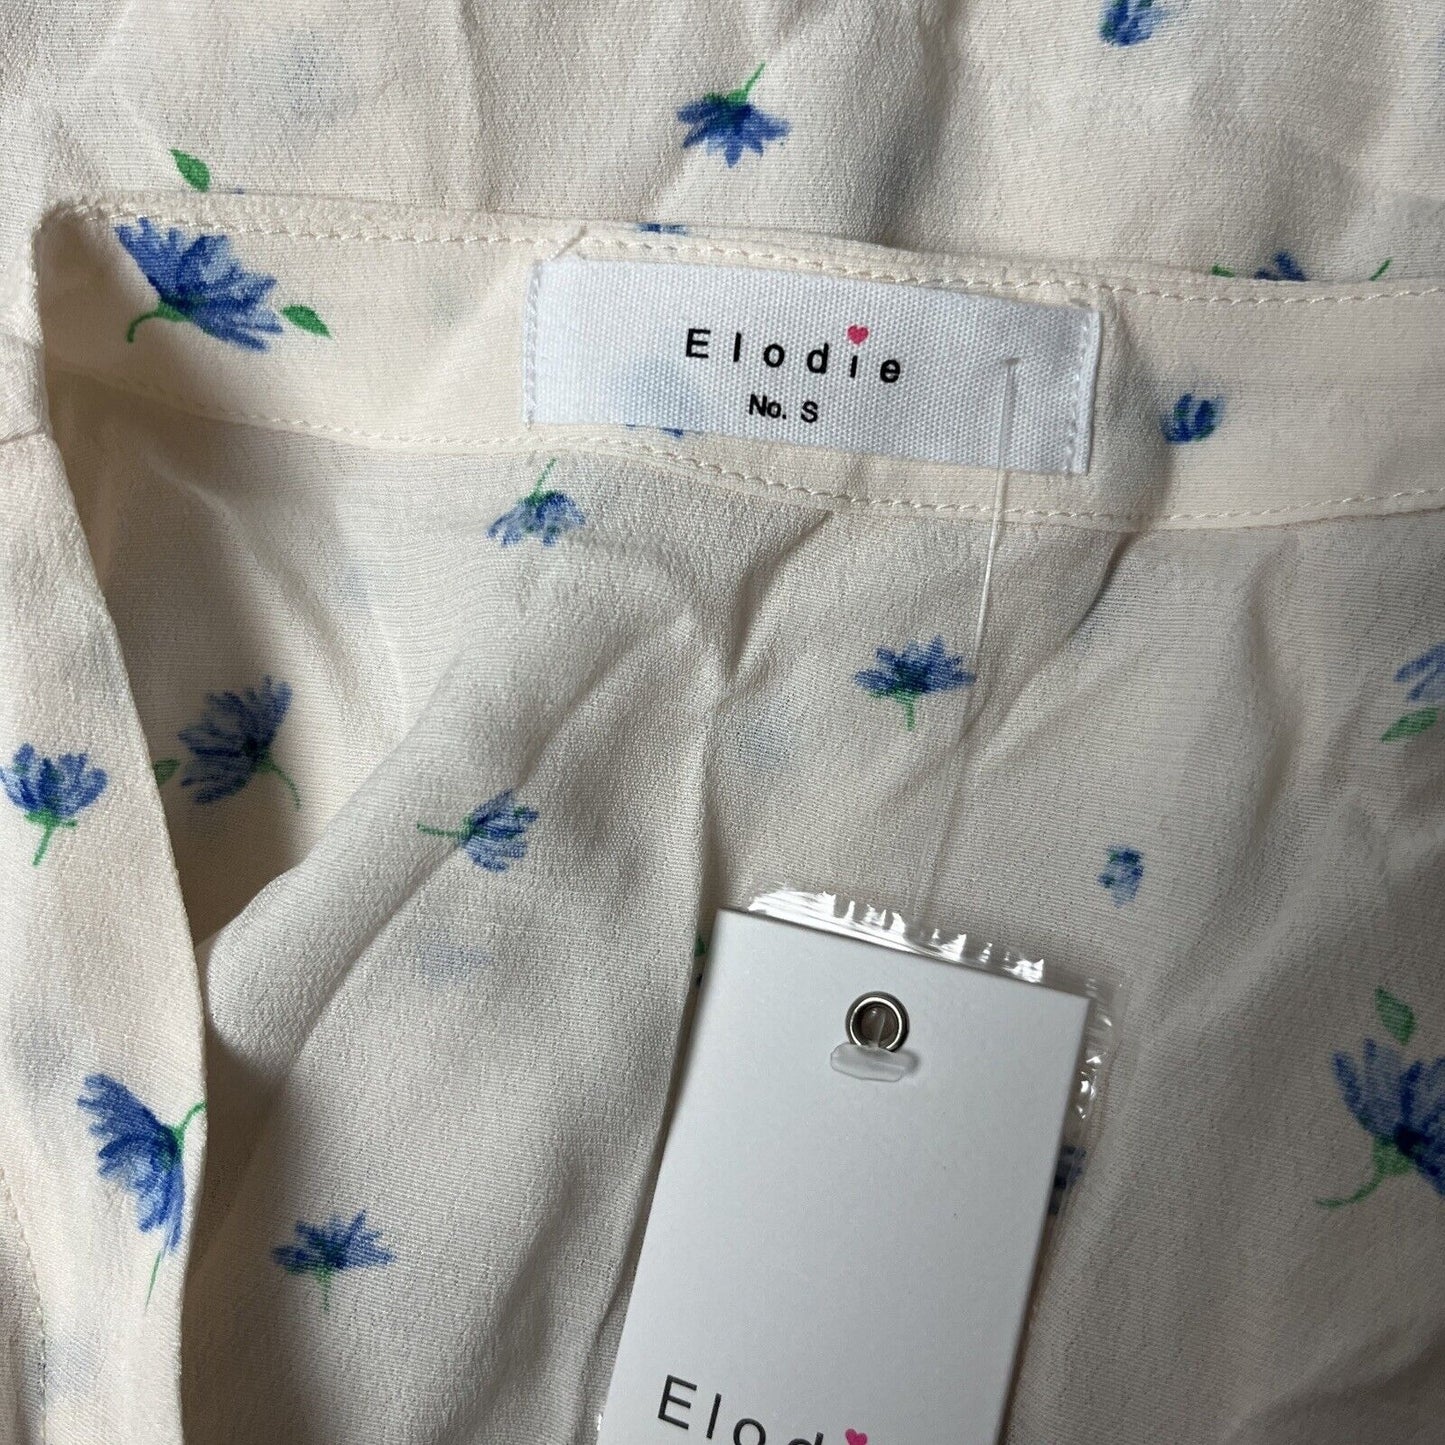 Elodie White Floral Surplice V-Neck White Top Size Small